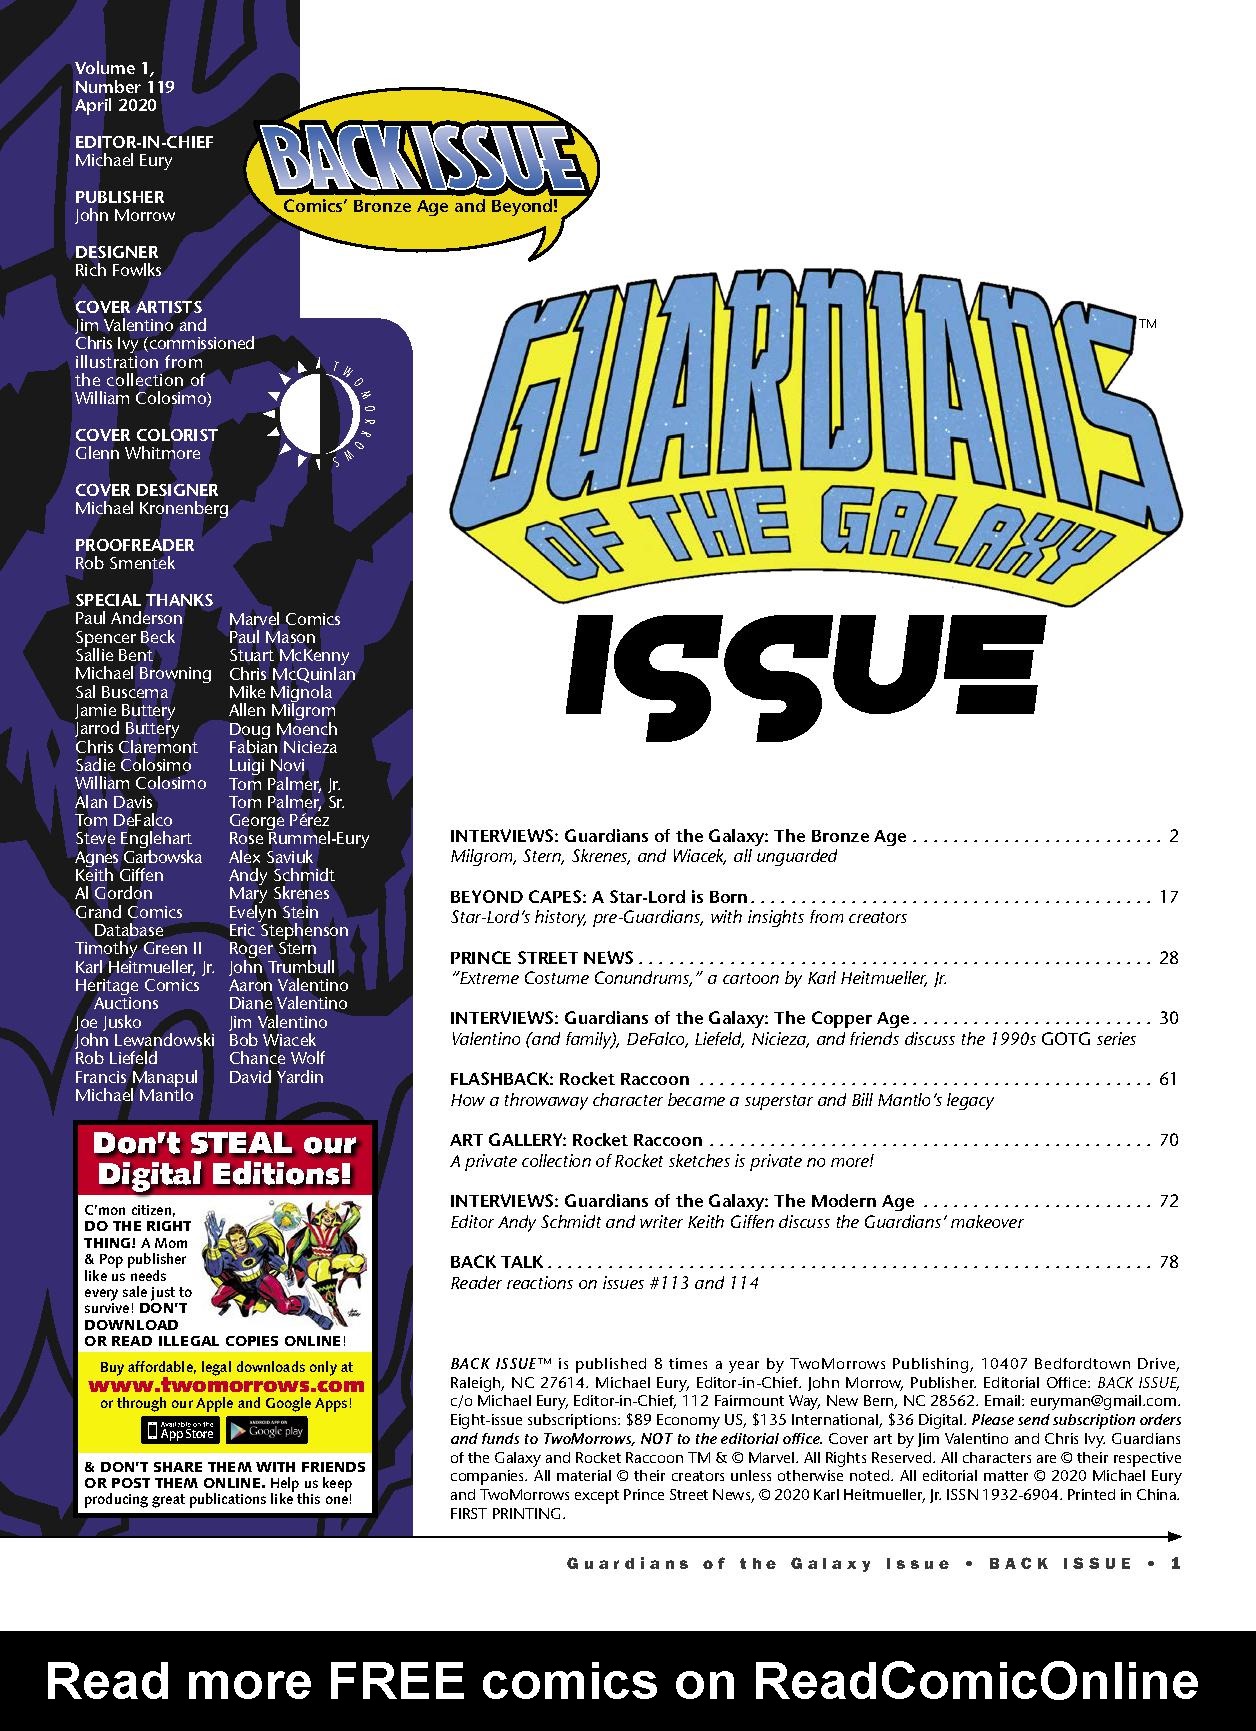 Read online Back Issue comic -  Issue #119 - 3